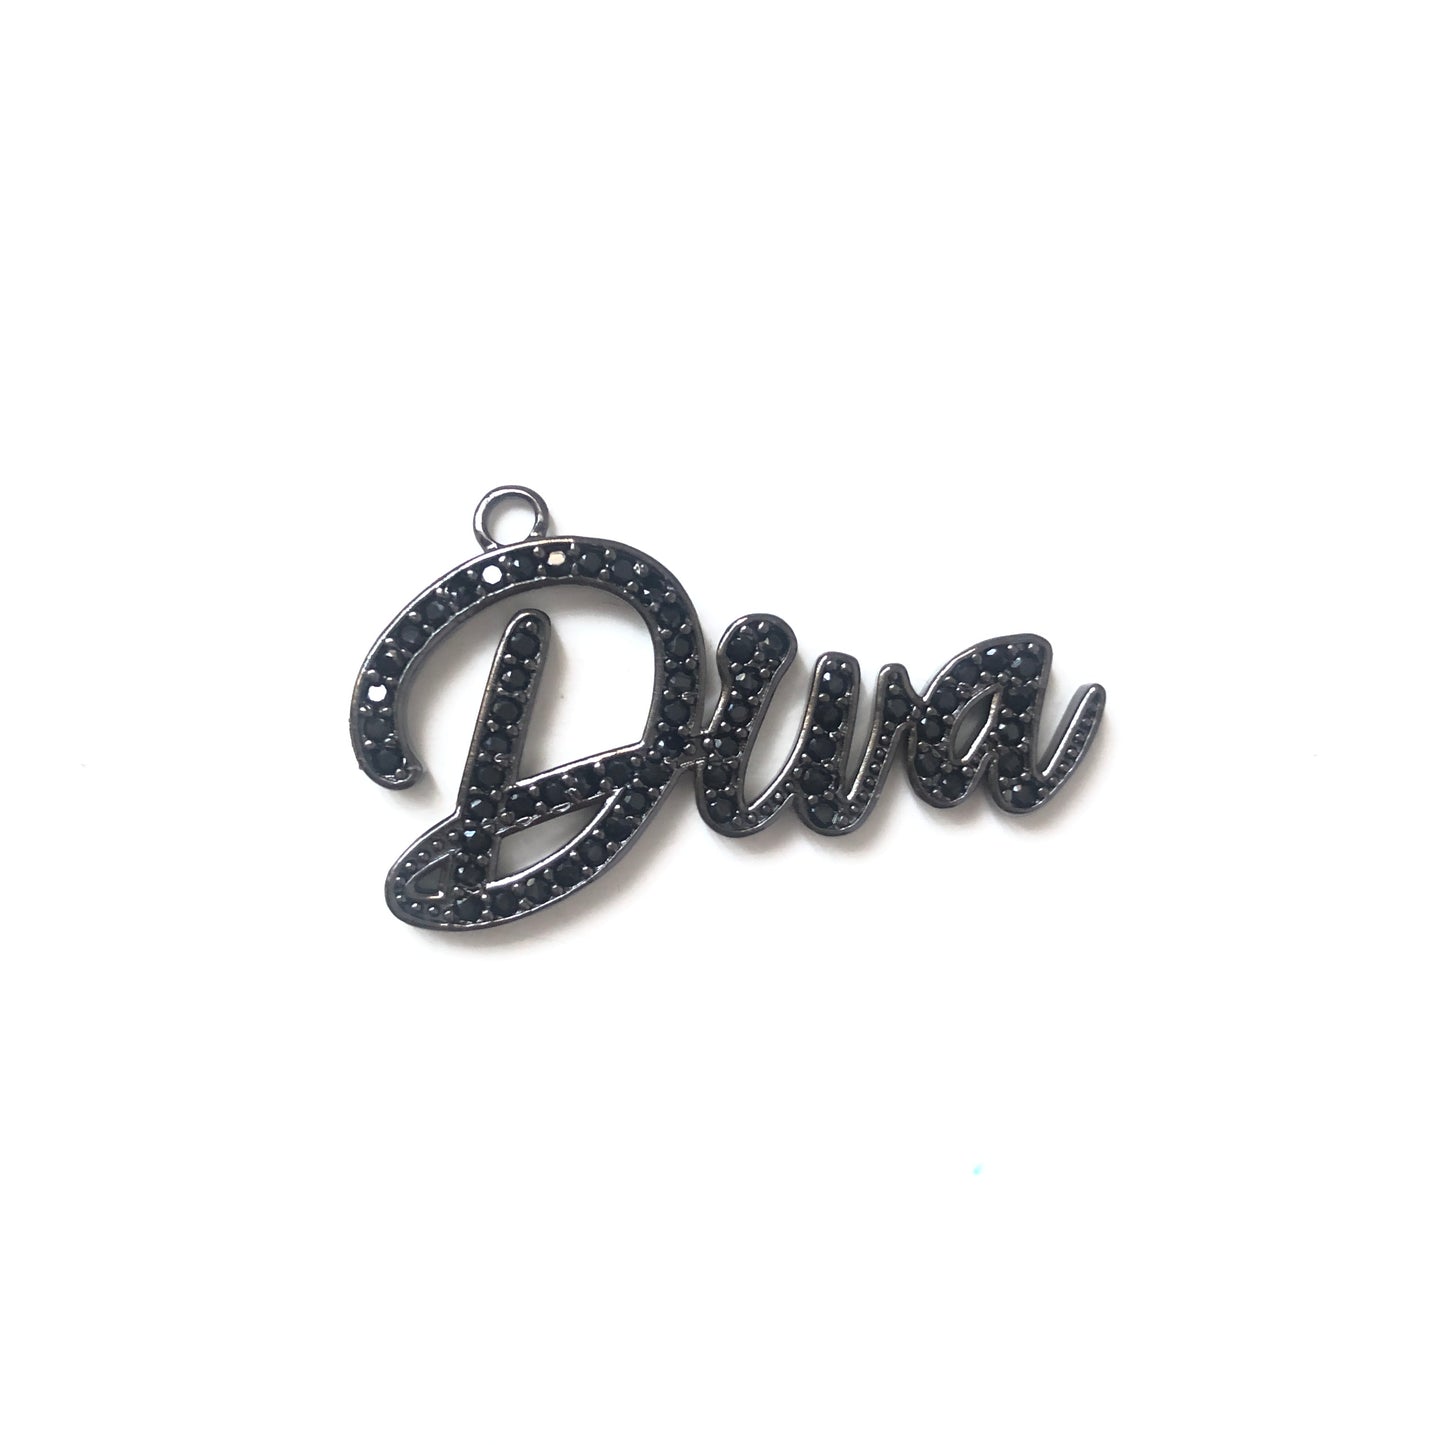 10pcs/lot 39*19mm CZ Paved DIVA Charms Black on Black CZ Paved Charms Words & Quotes Charms Beads Beyond